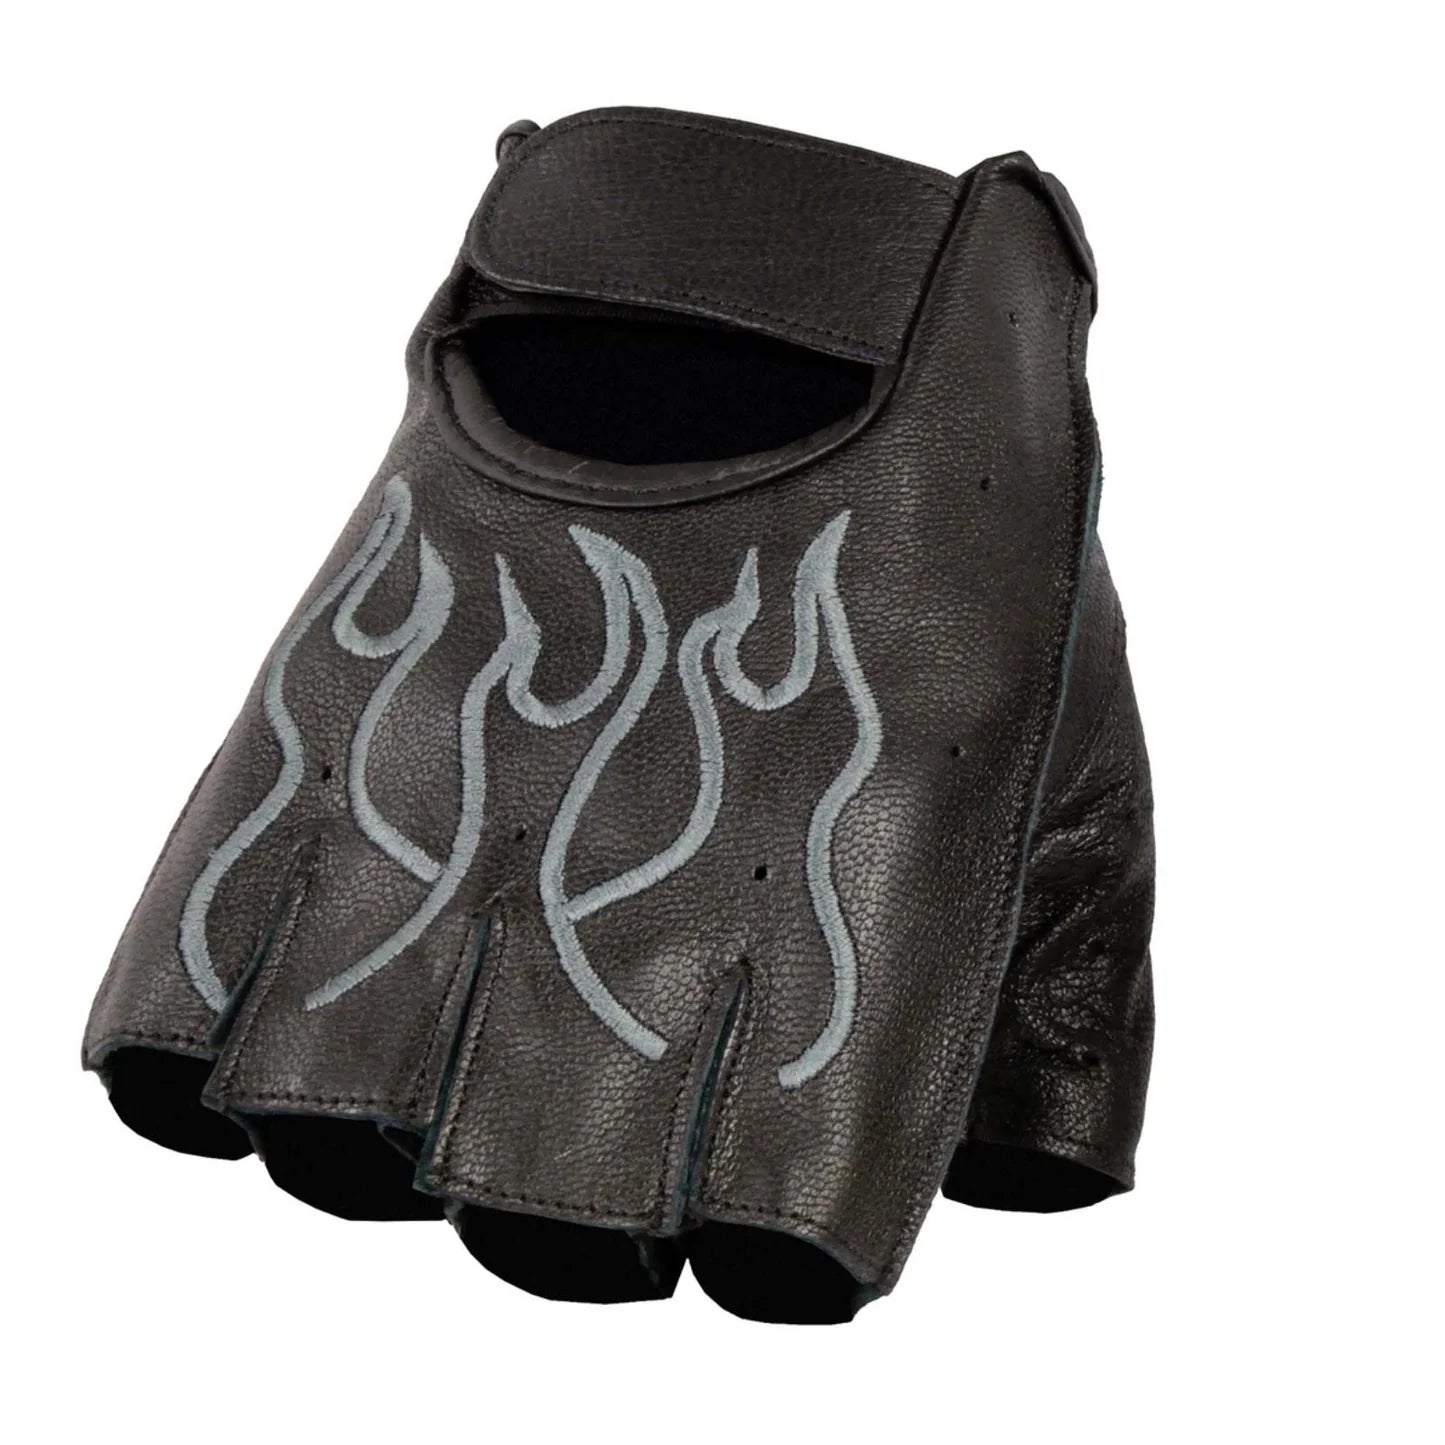 Men's Black Leather Gel Padded Palm Fingerless Motorcycle Hand Gloves W/ ‘Grey Flame Embroidered’